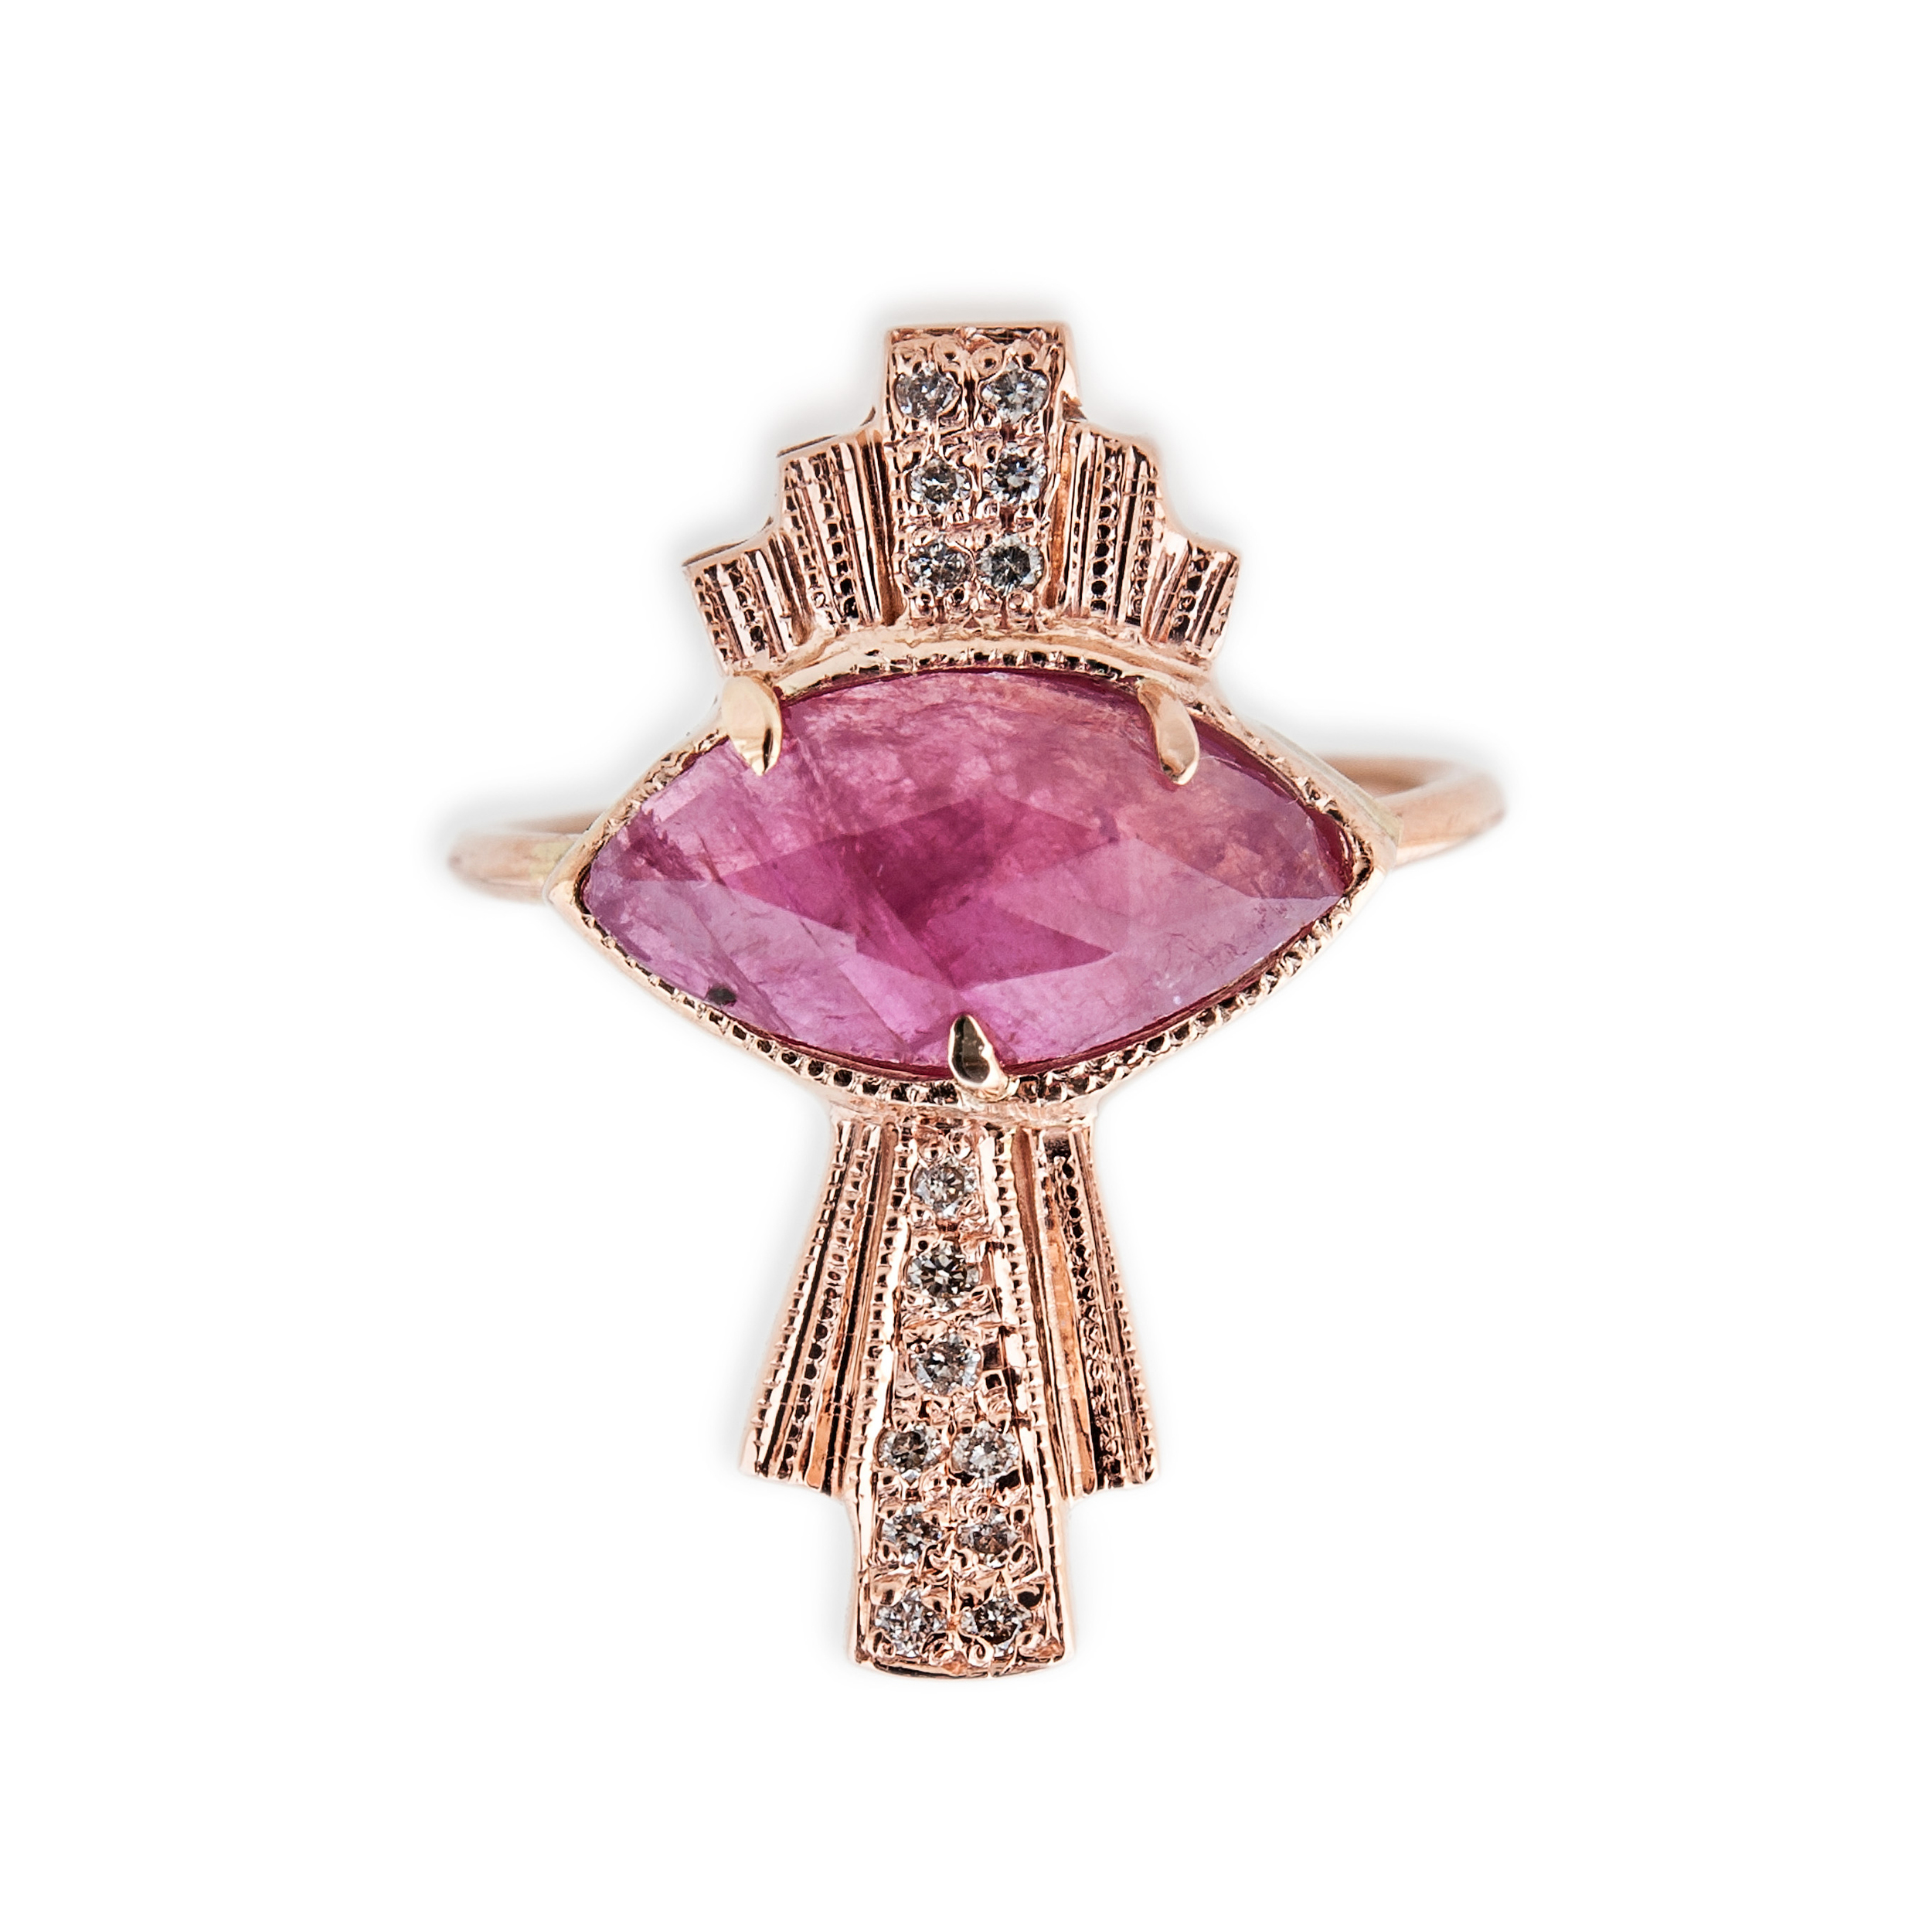  Indian Ruby Deco Eye Ring,&nbsp;$1,565, available at Broken English.&nbsp; 